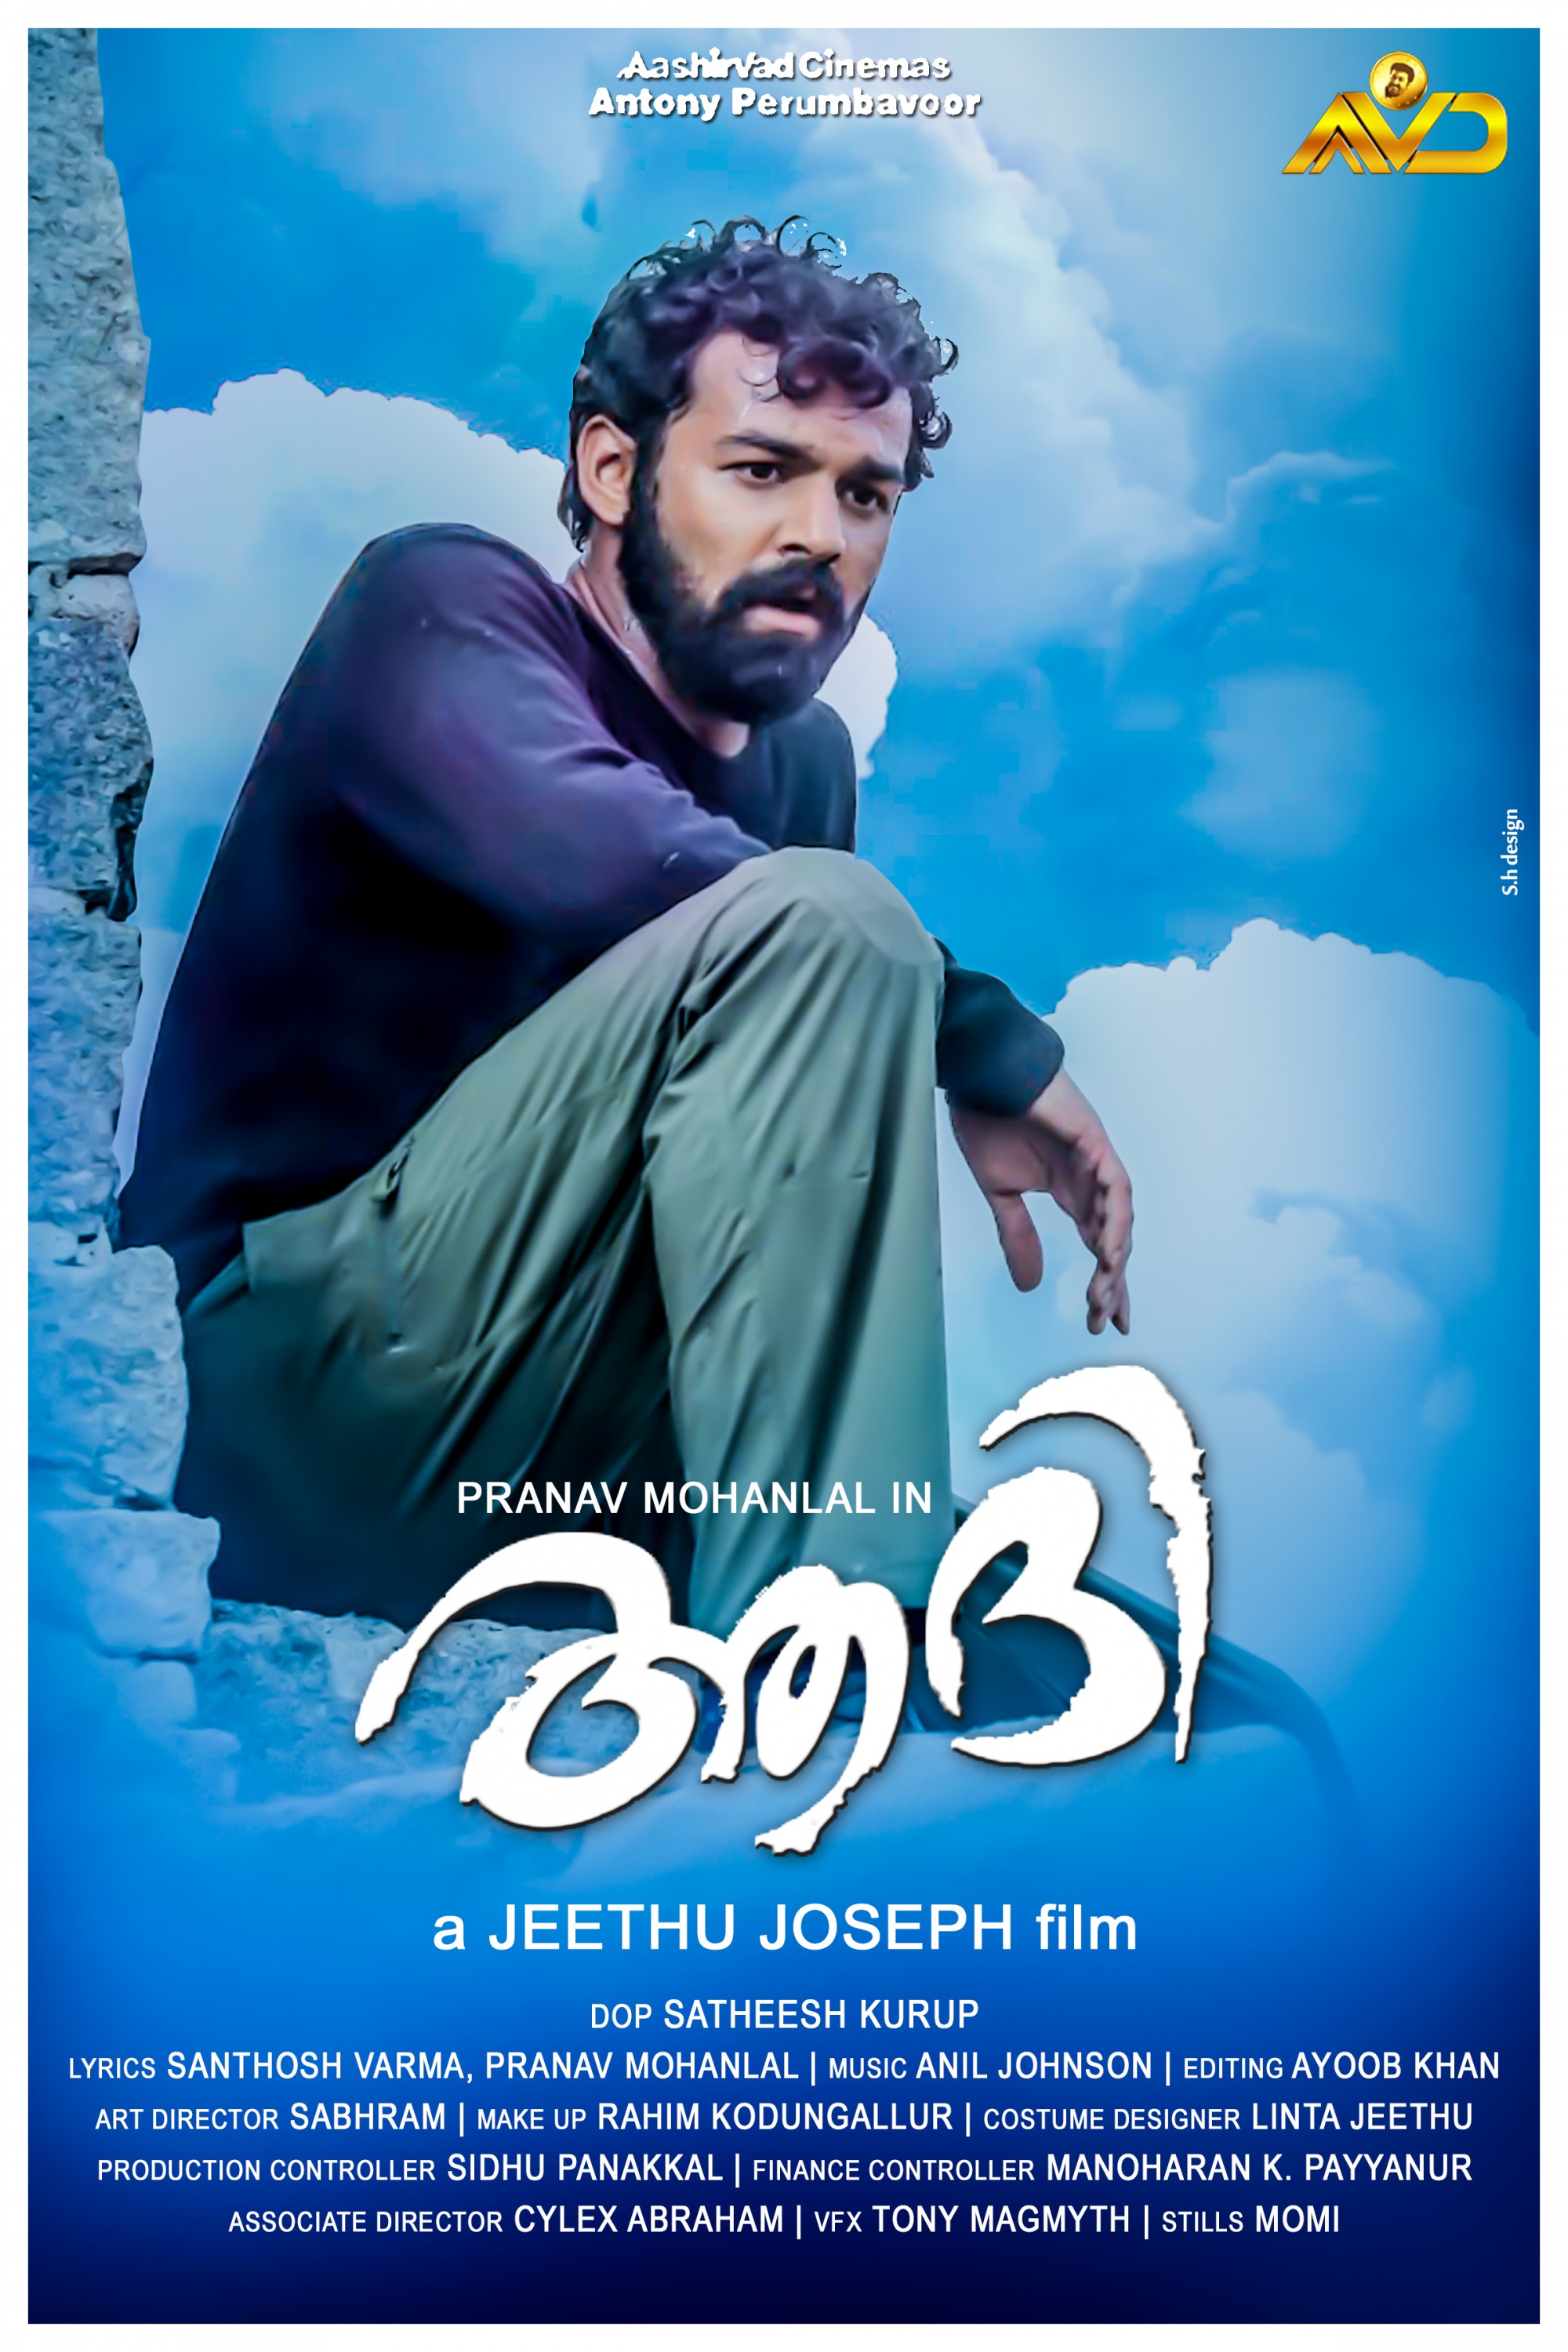 Mega Sized Movie Poster Image for Aadhi 